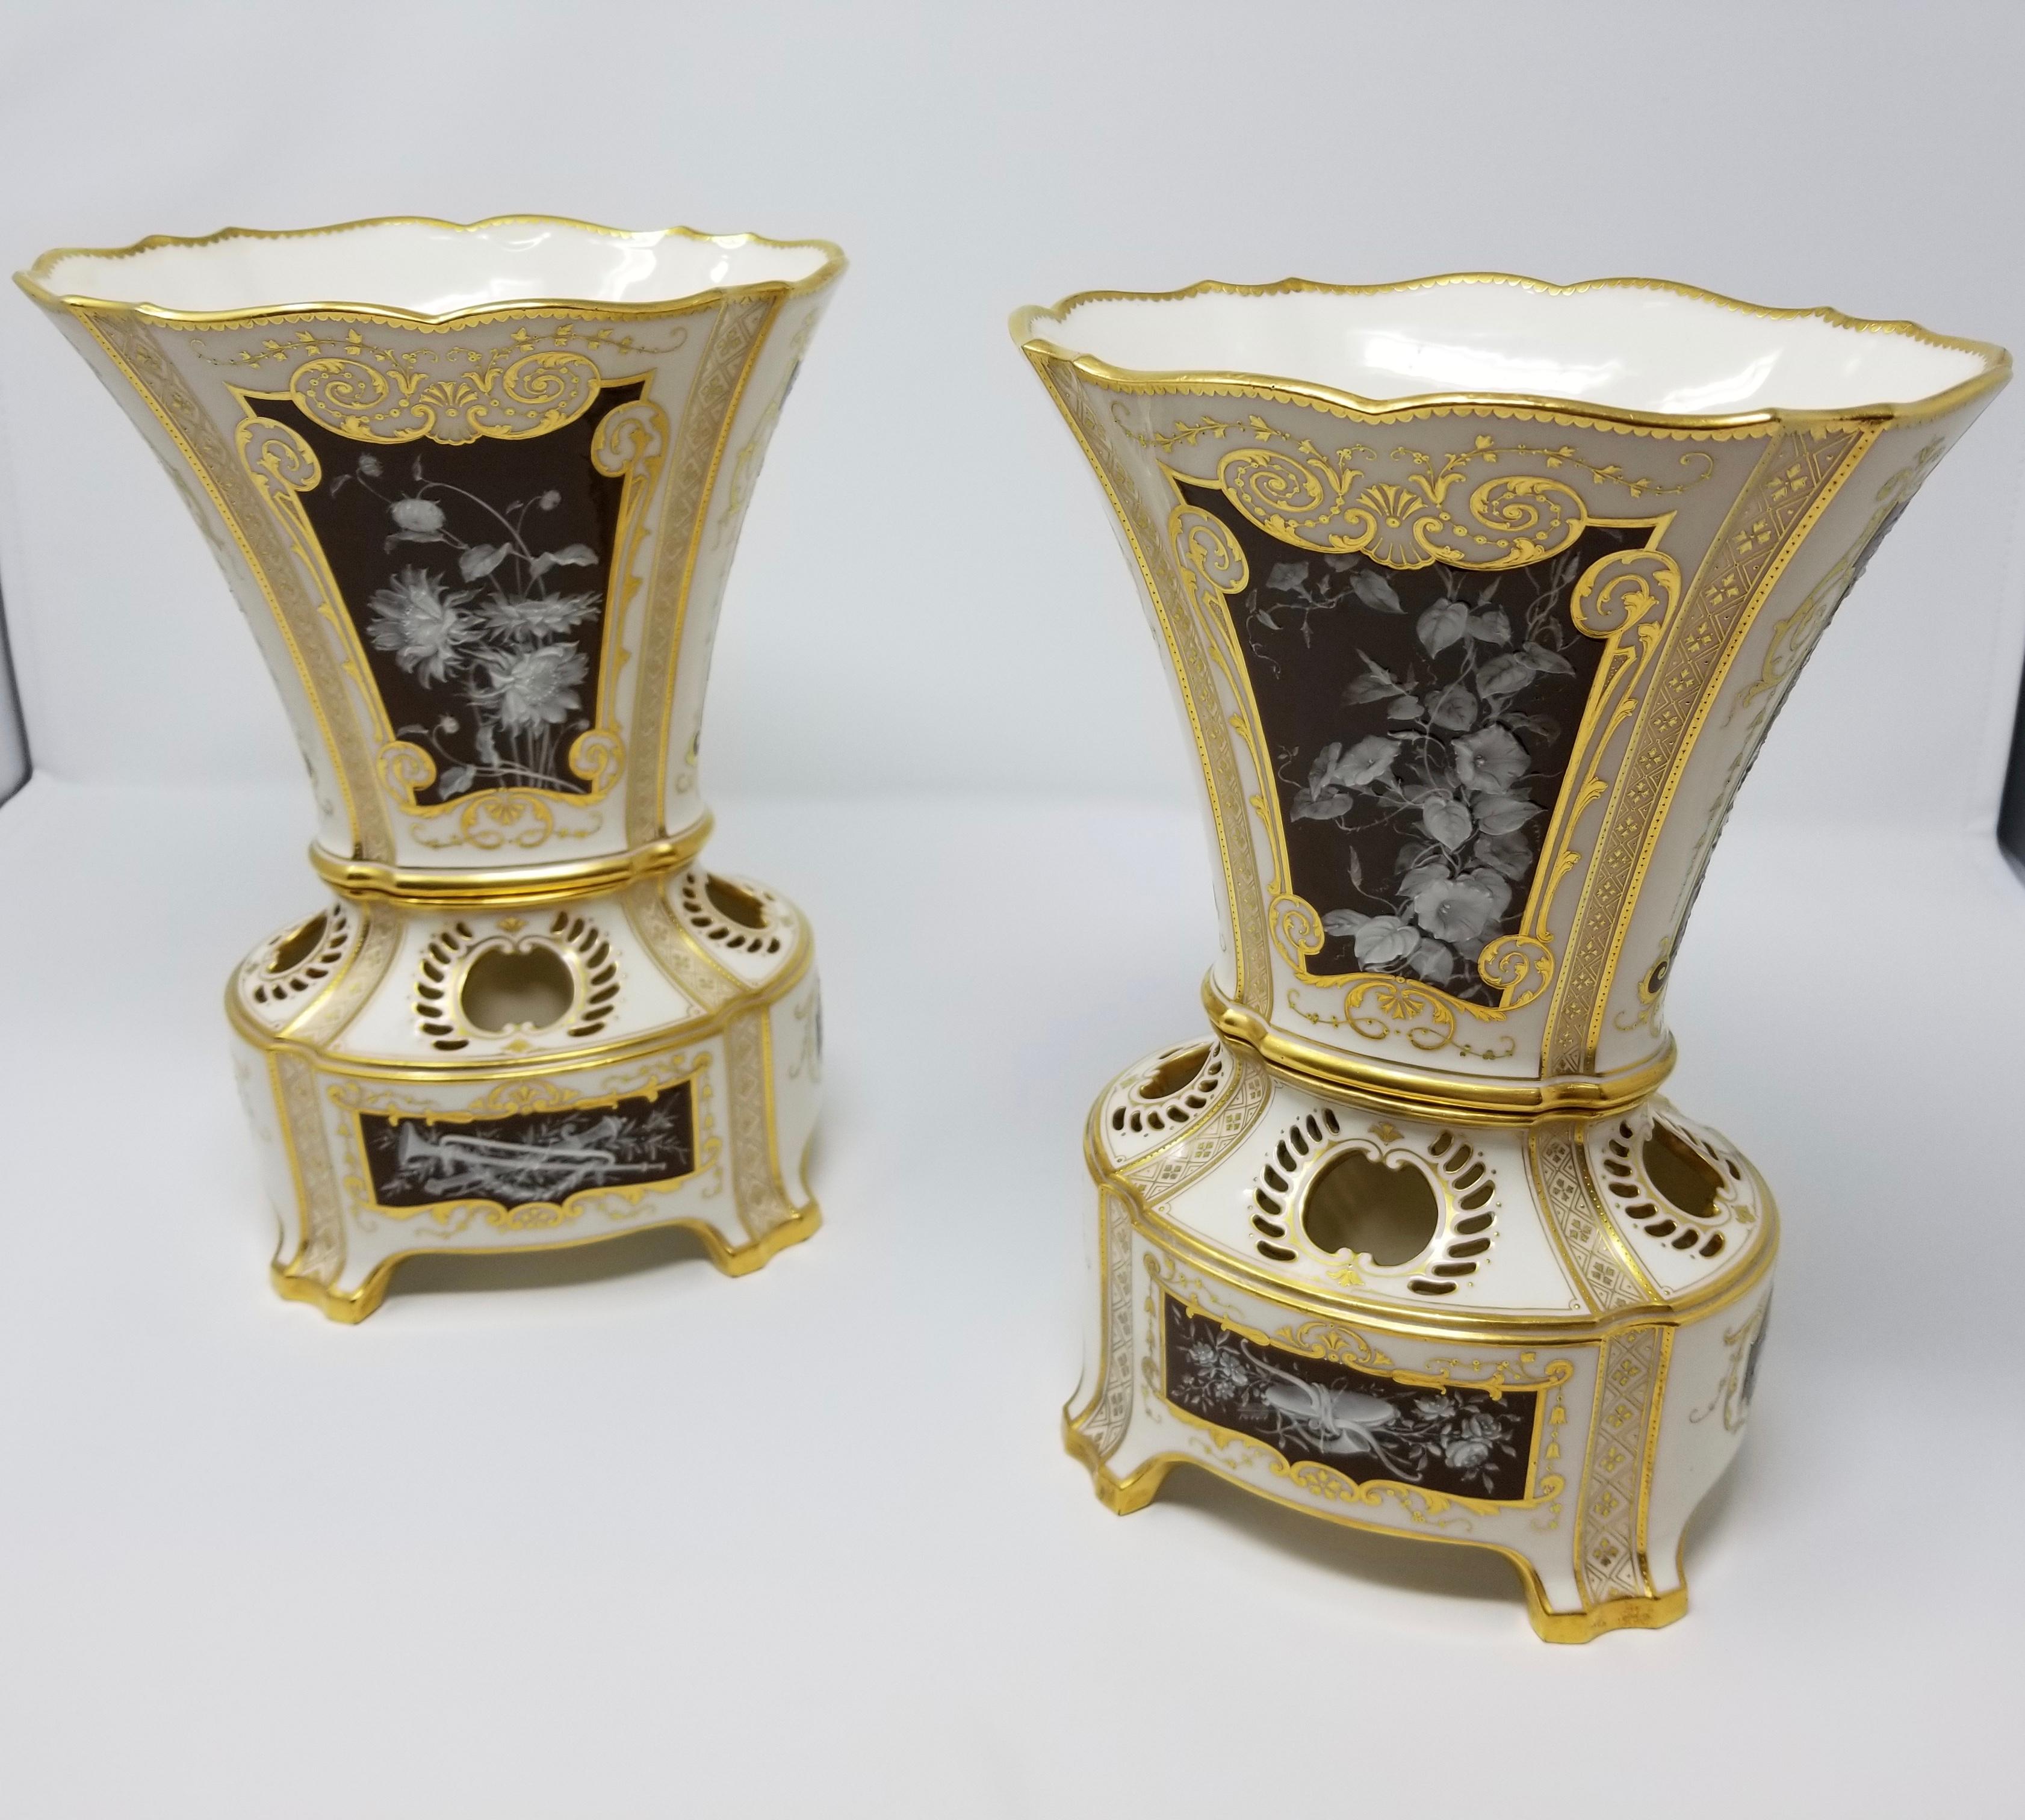 A beautiful pair of English Mintons olive-brown and white pate sur pate vases with 12 total pate sur pate panels, signed AB for Albion Birks. Each of the 12 panels depicts a different subject. Two panels depict putti playing with each other in a